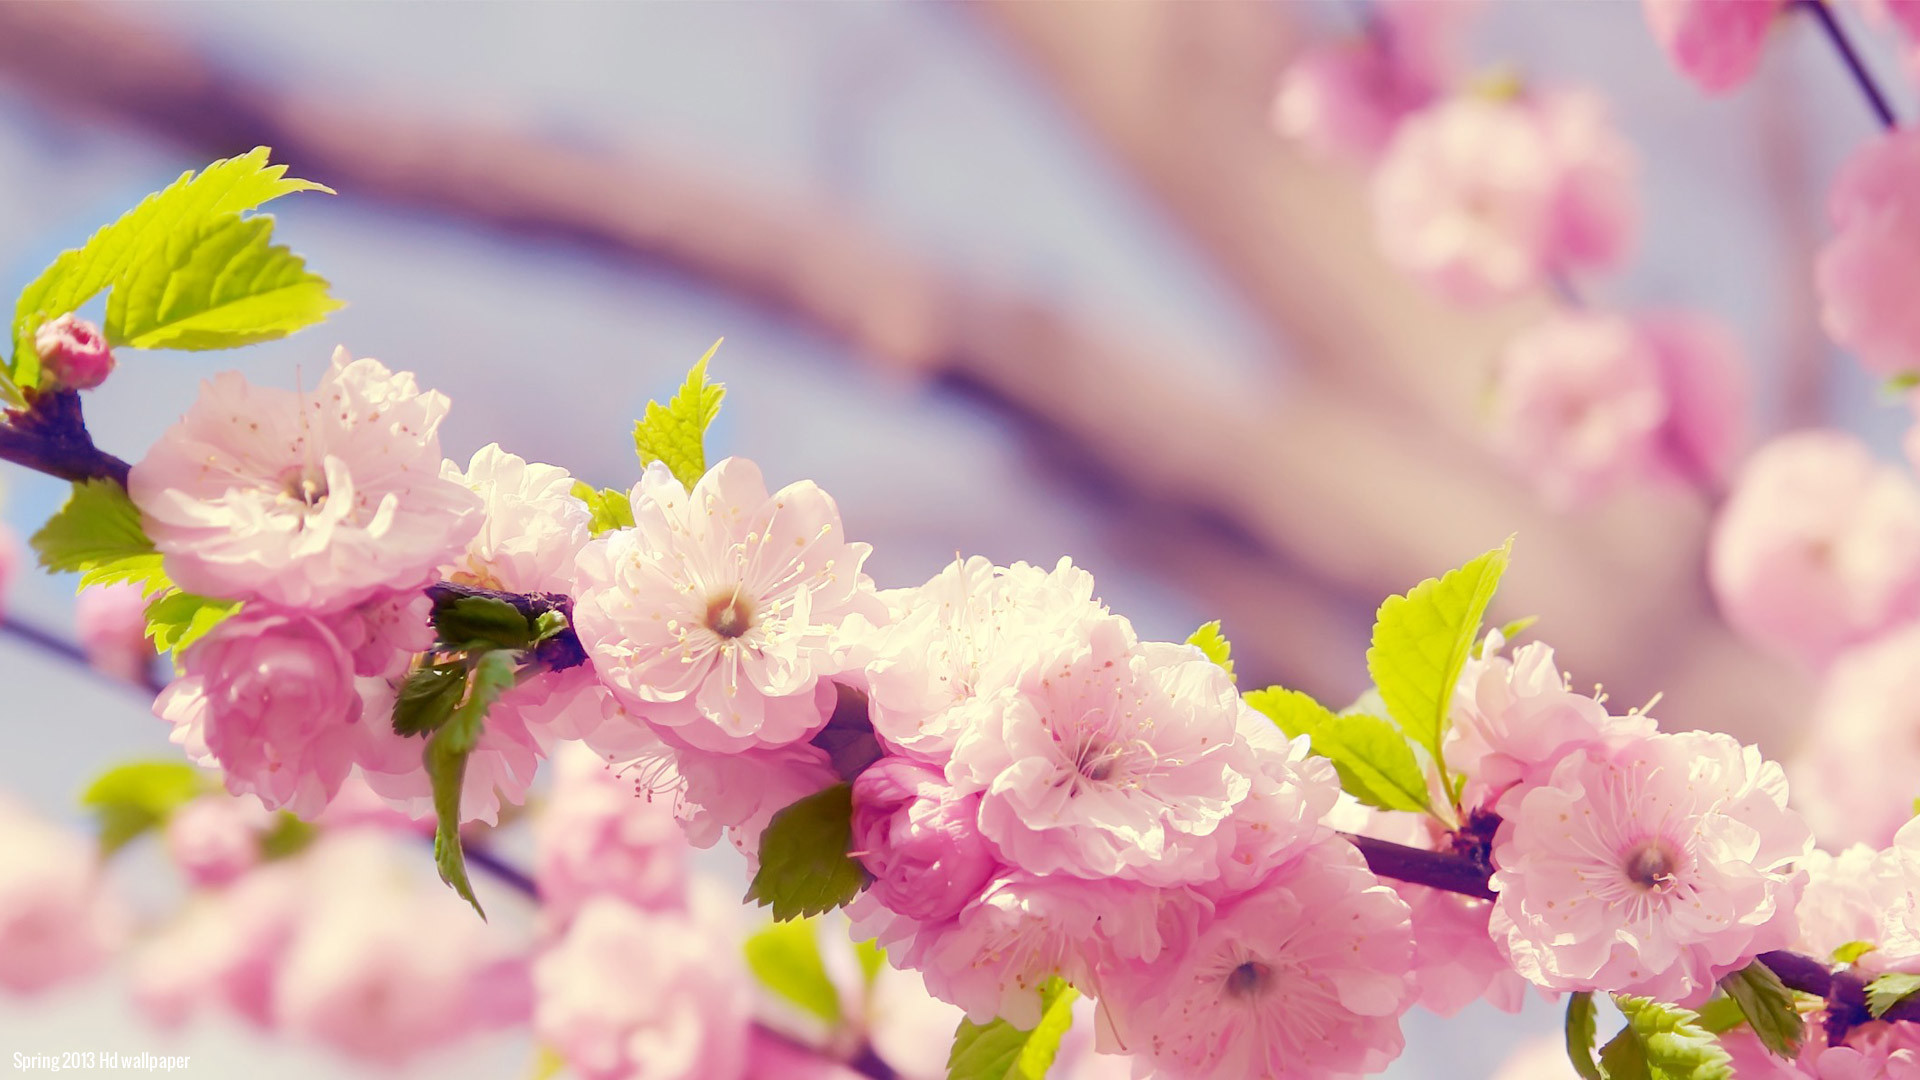 1920x1080 spring romantic flower wallpapers hd - http://69hdwallpapers.com/spring-